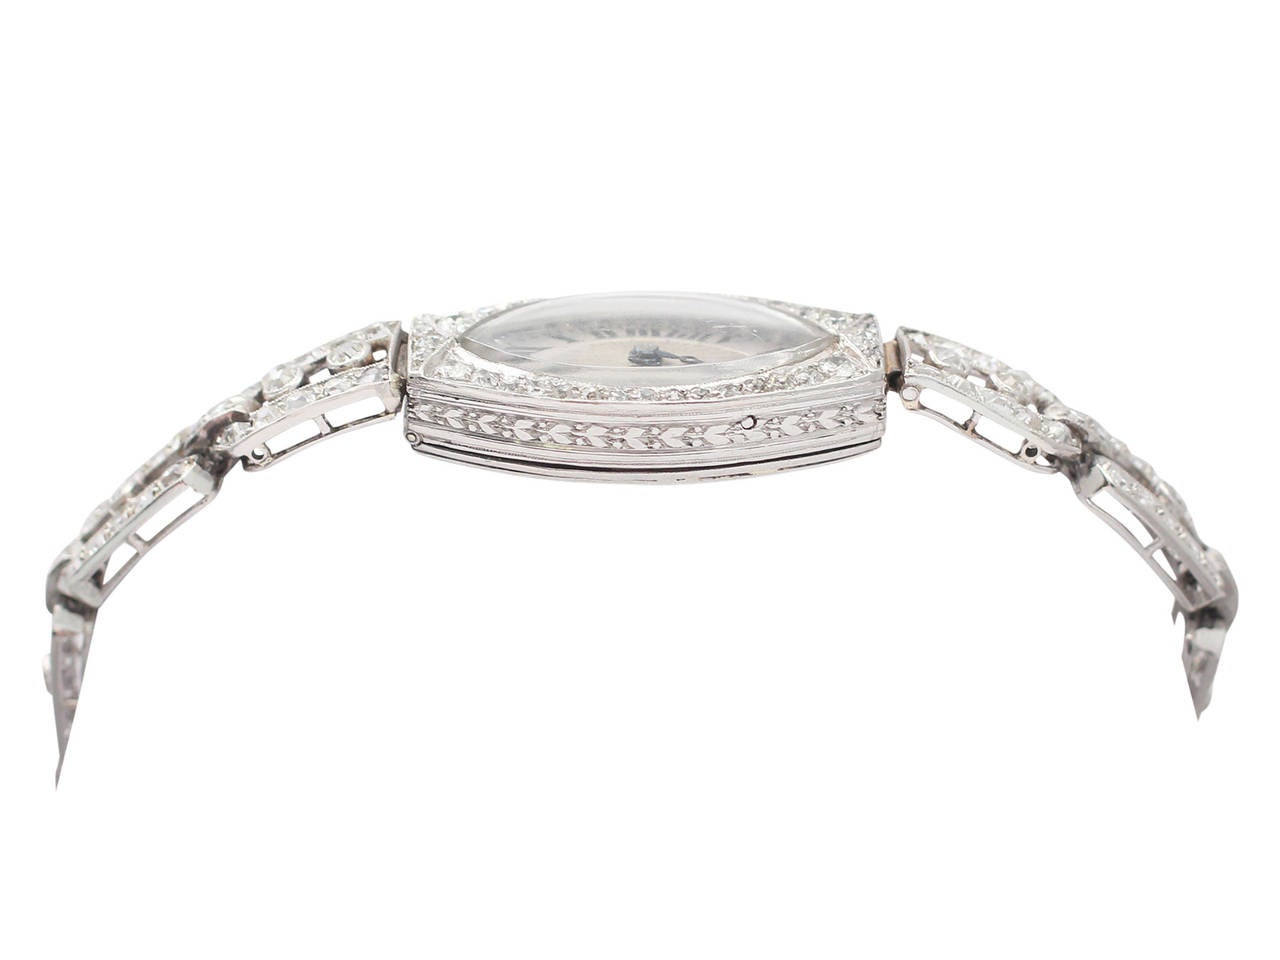 A fine and impressive 2.02 carat diamond and platinum antique Art Deco style cocktail watch; part of our diamond jewelry and estate jewelry collections

This fine and impressive antique ladies diamond cocktail watch has been crafted in